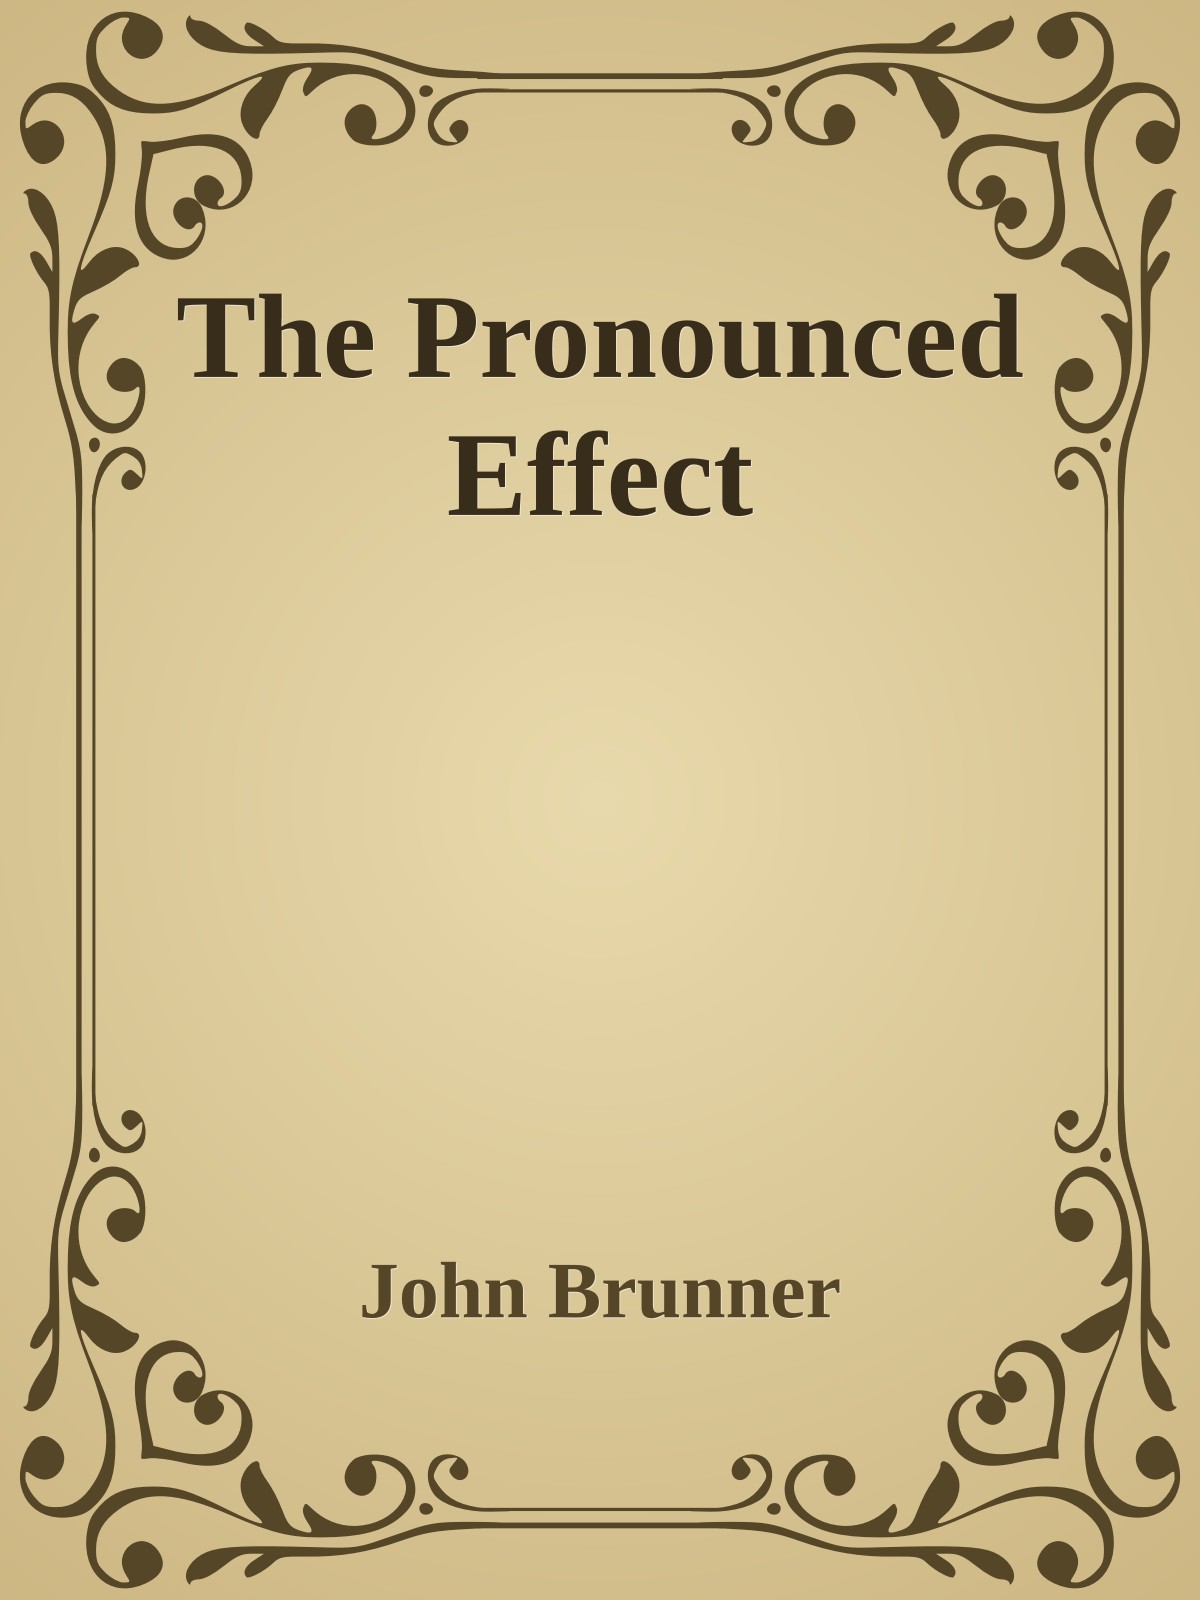 The Pronounced Effect